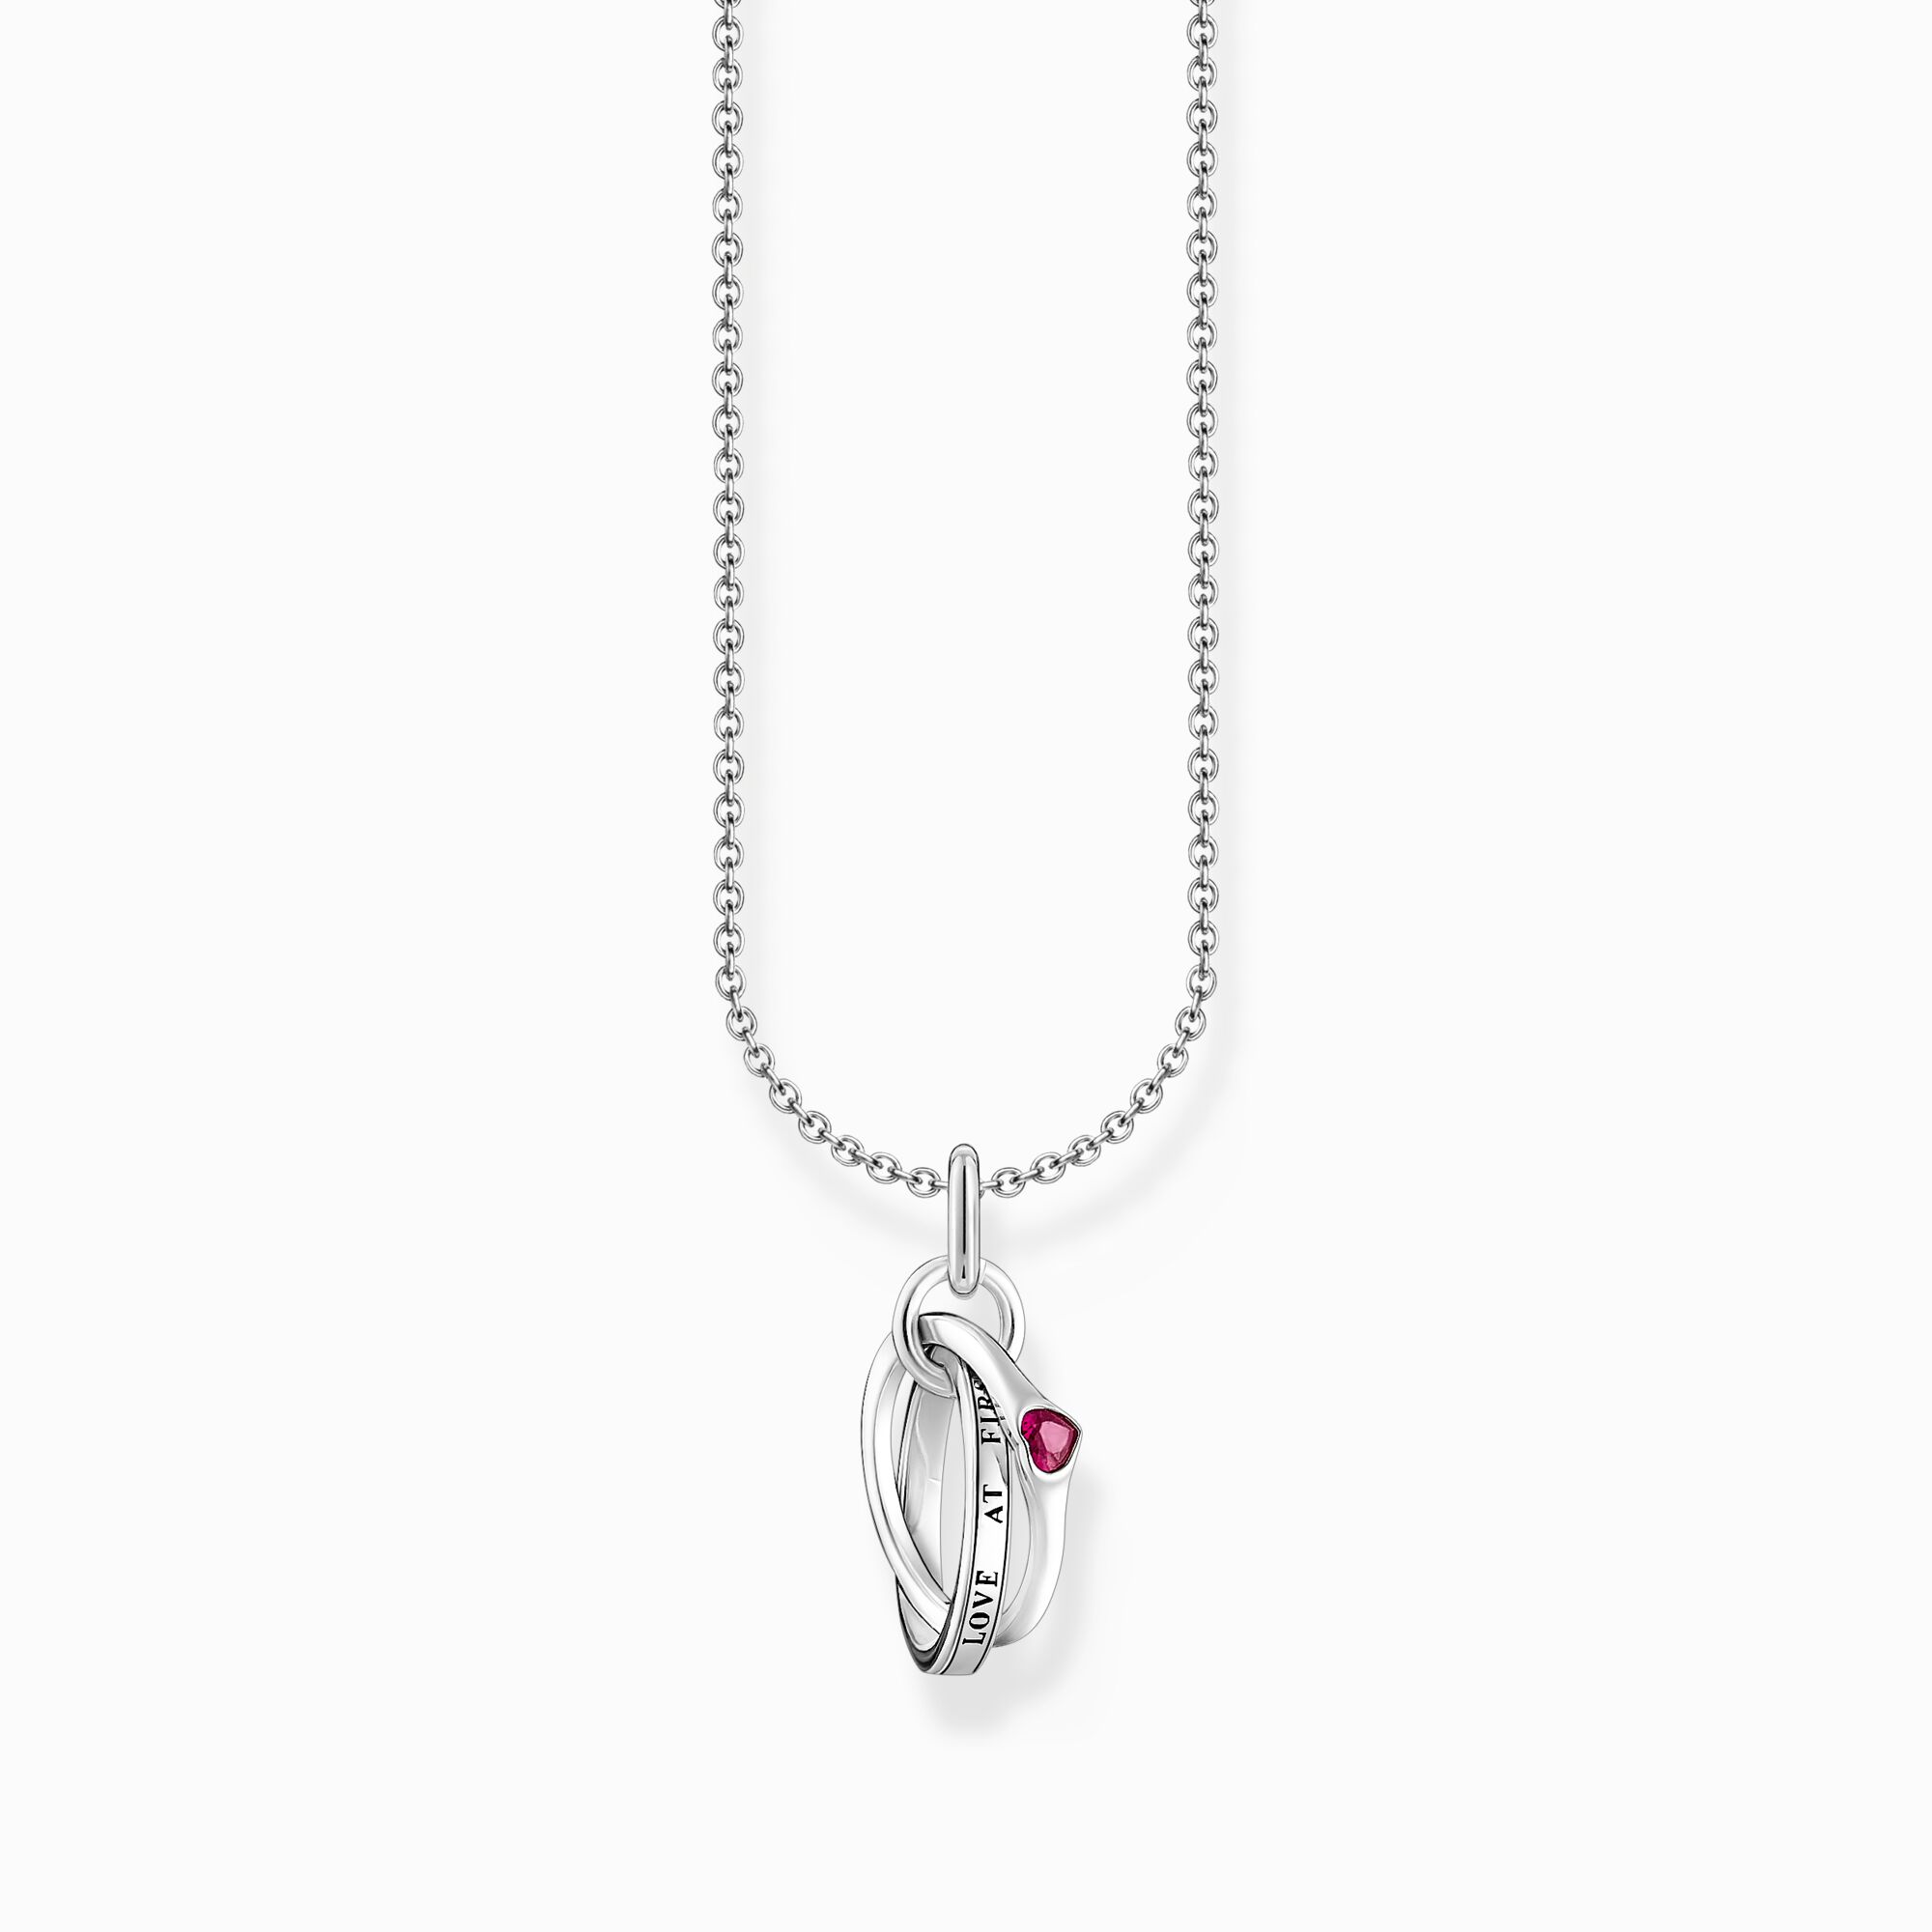 Silver neckalce with Together ring pendant from the Charming Collection collection in the THOMAS SABO online store